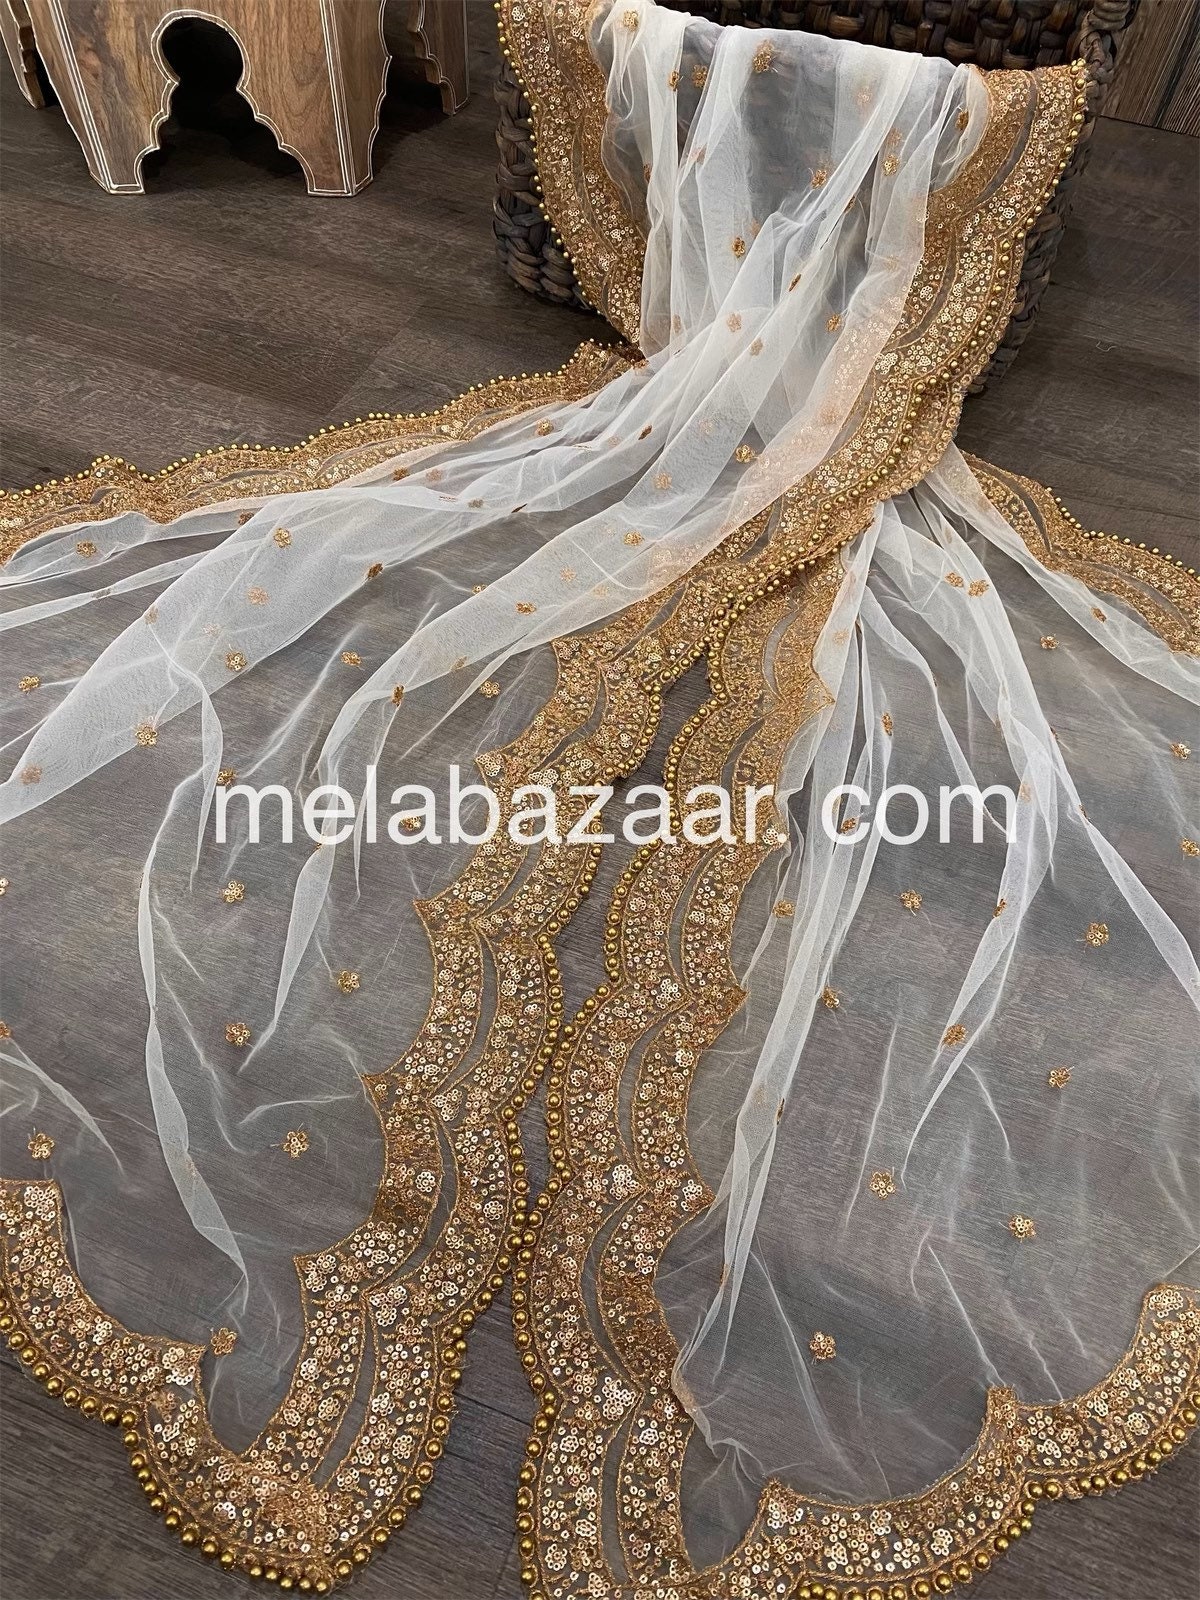 Sequins White Net Dupatta / Stole Wrap, Free Shipping in US